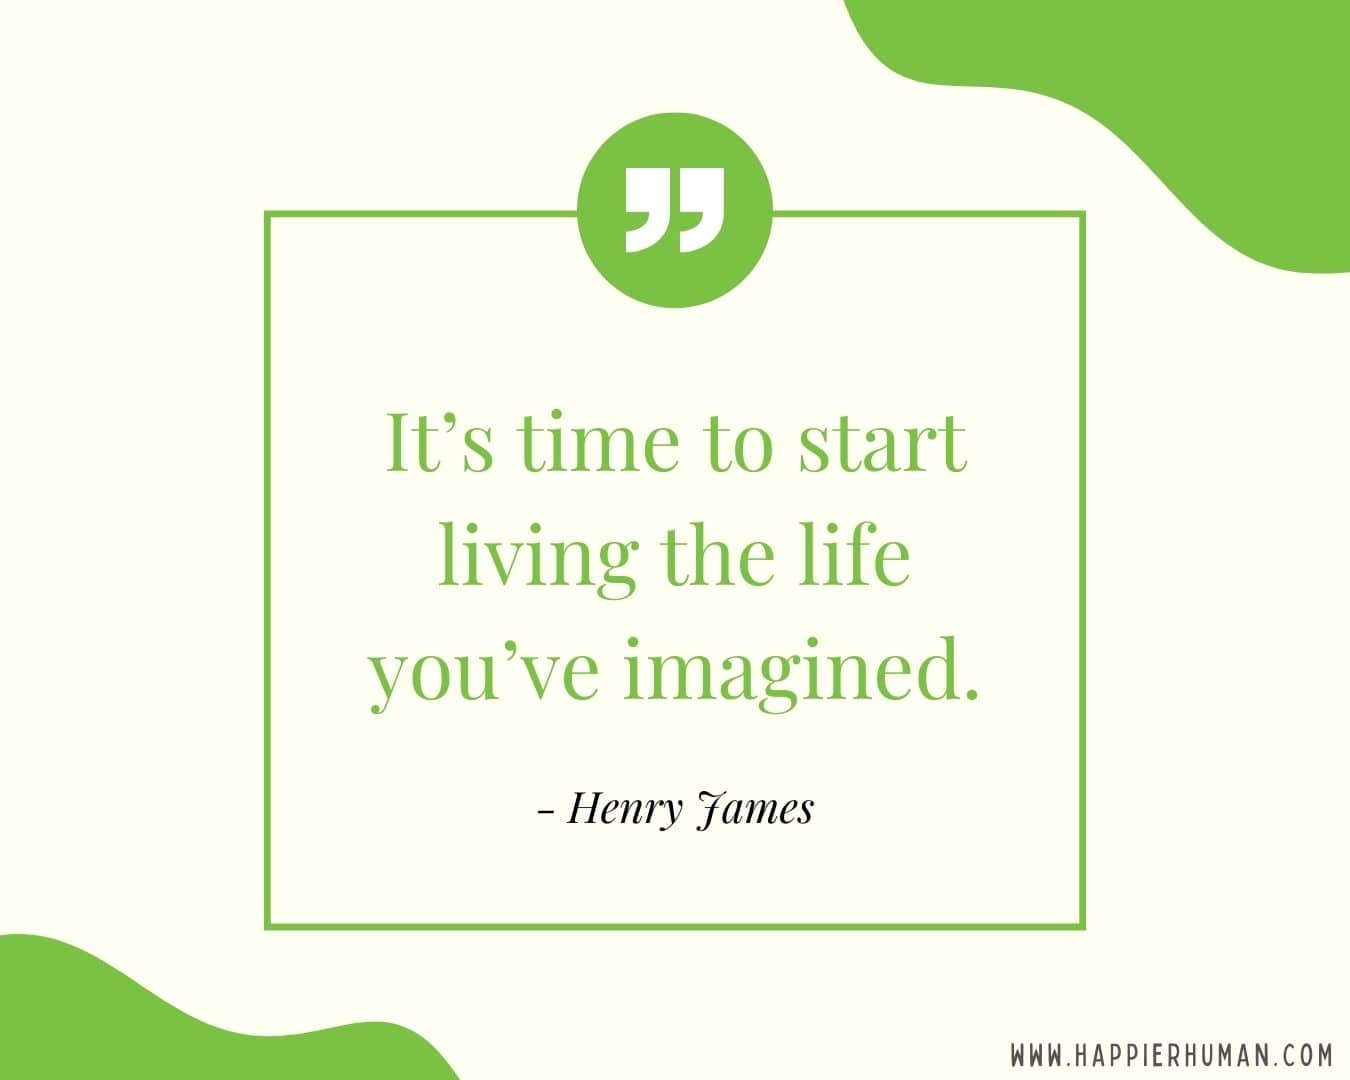 Great Day Quotes - “It’s time to start living the life you’ve imagined.” – Henry James